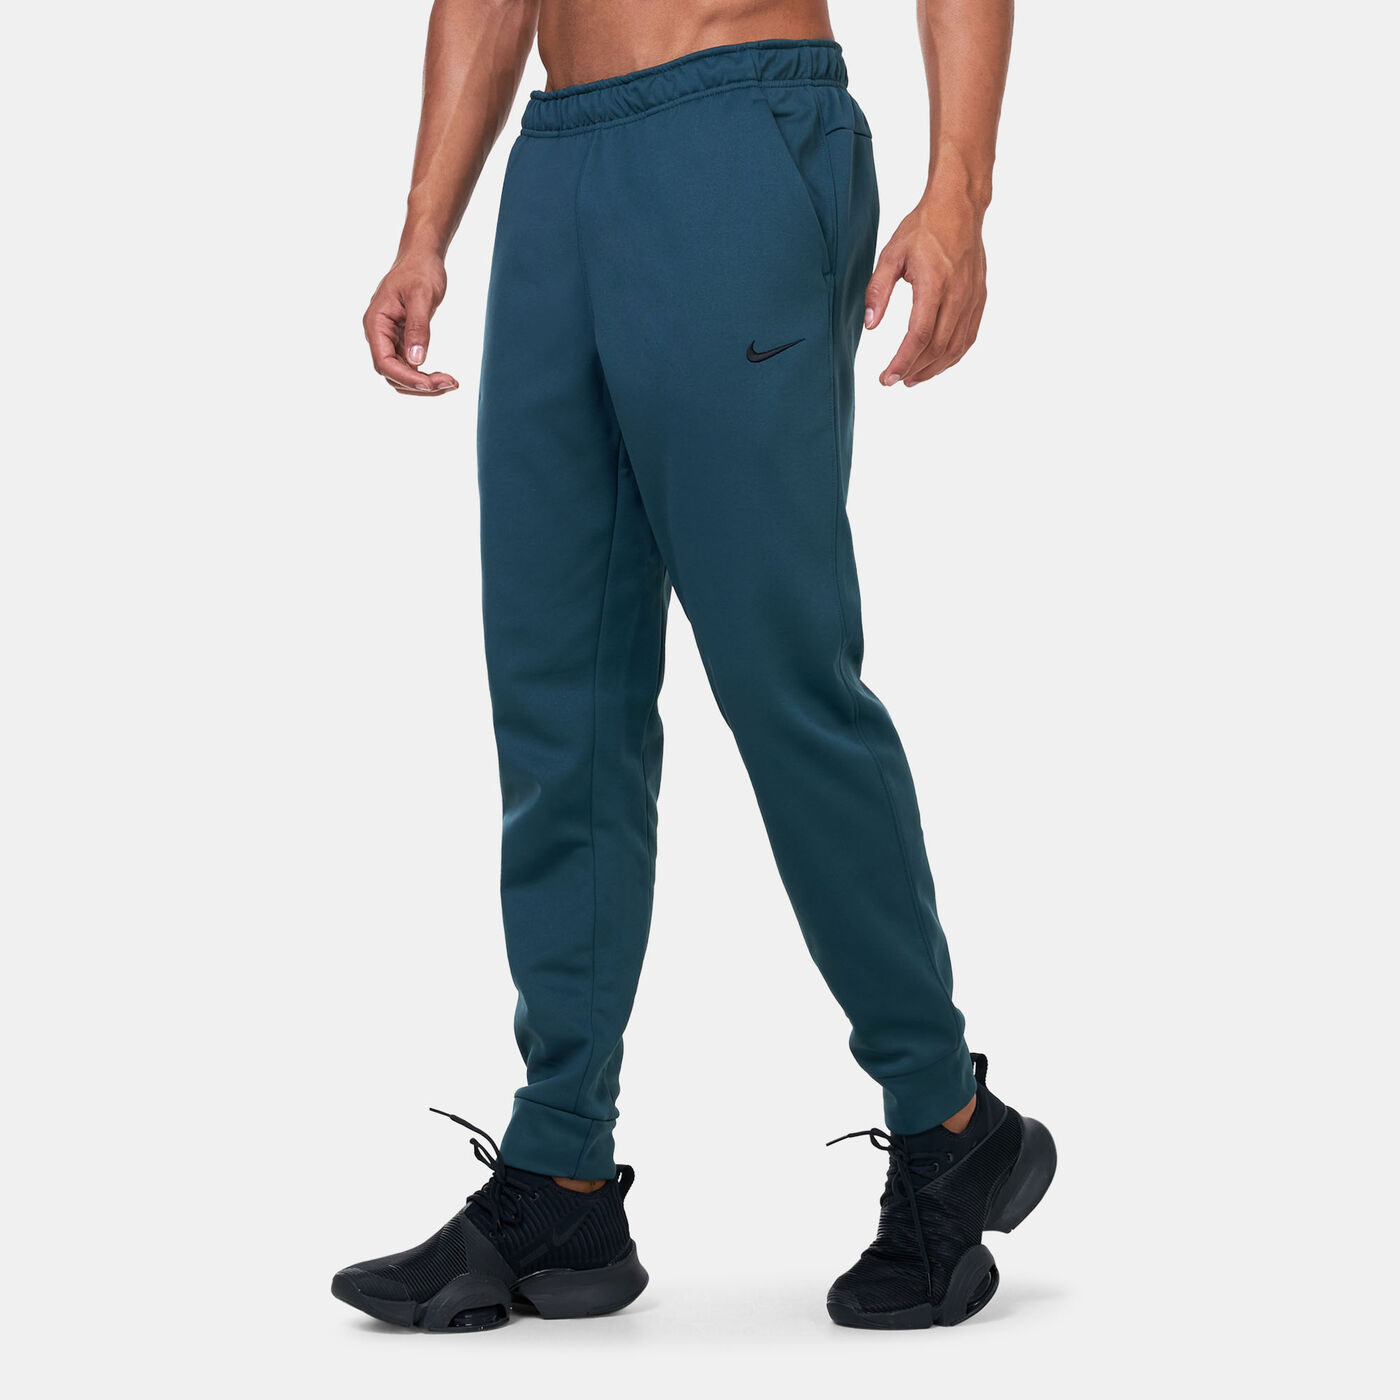 Men's Therma-FIT Training Pants